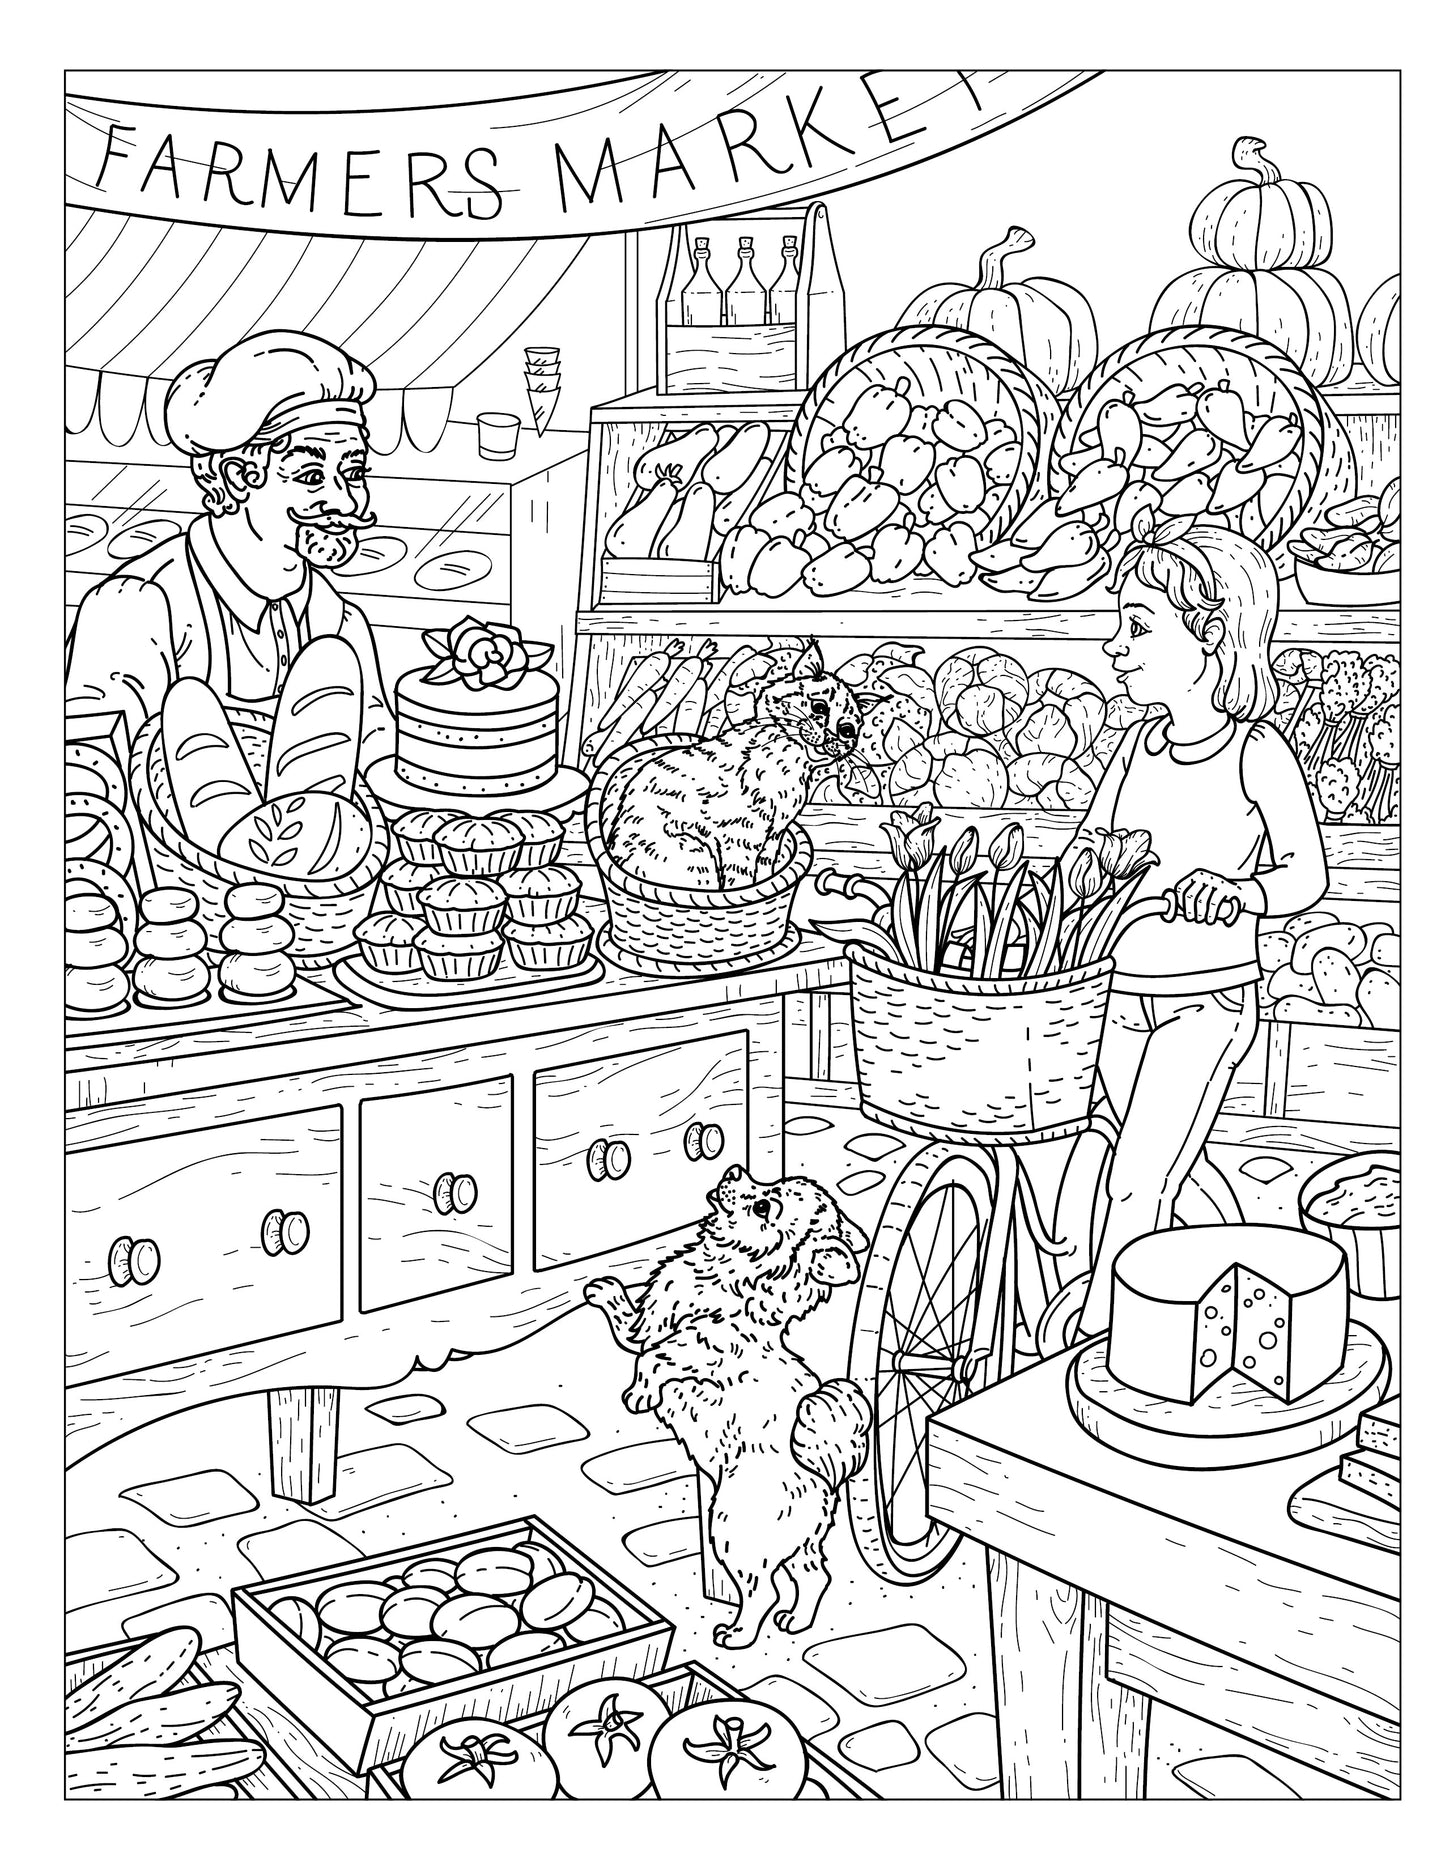 Single Coloring Book Page - Winston & Whiskers, Adventure One - At the Farmer's Market